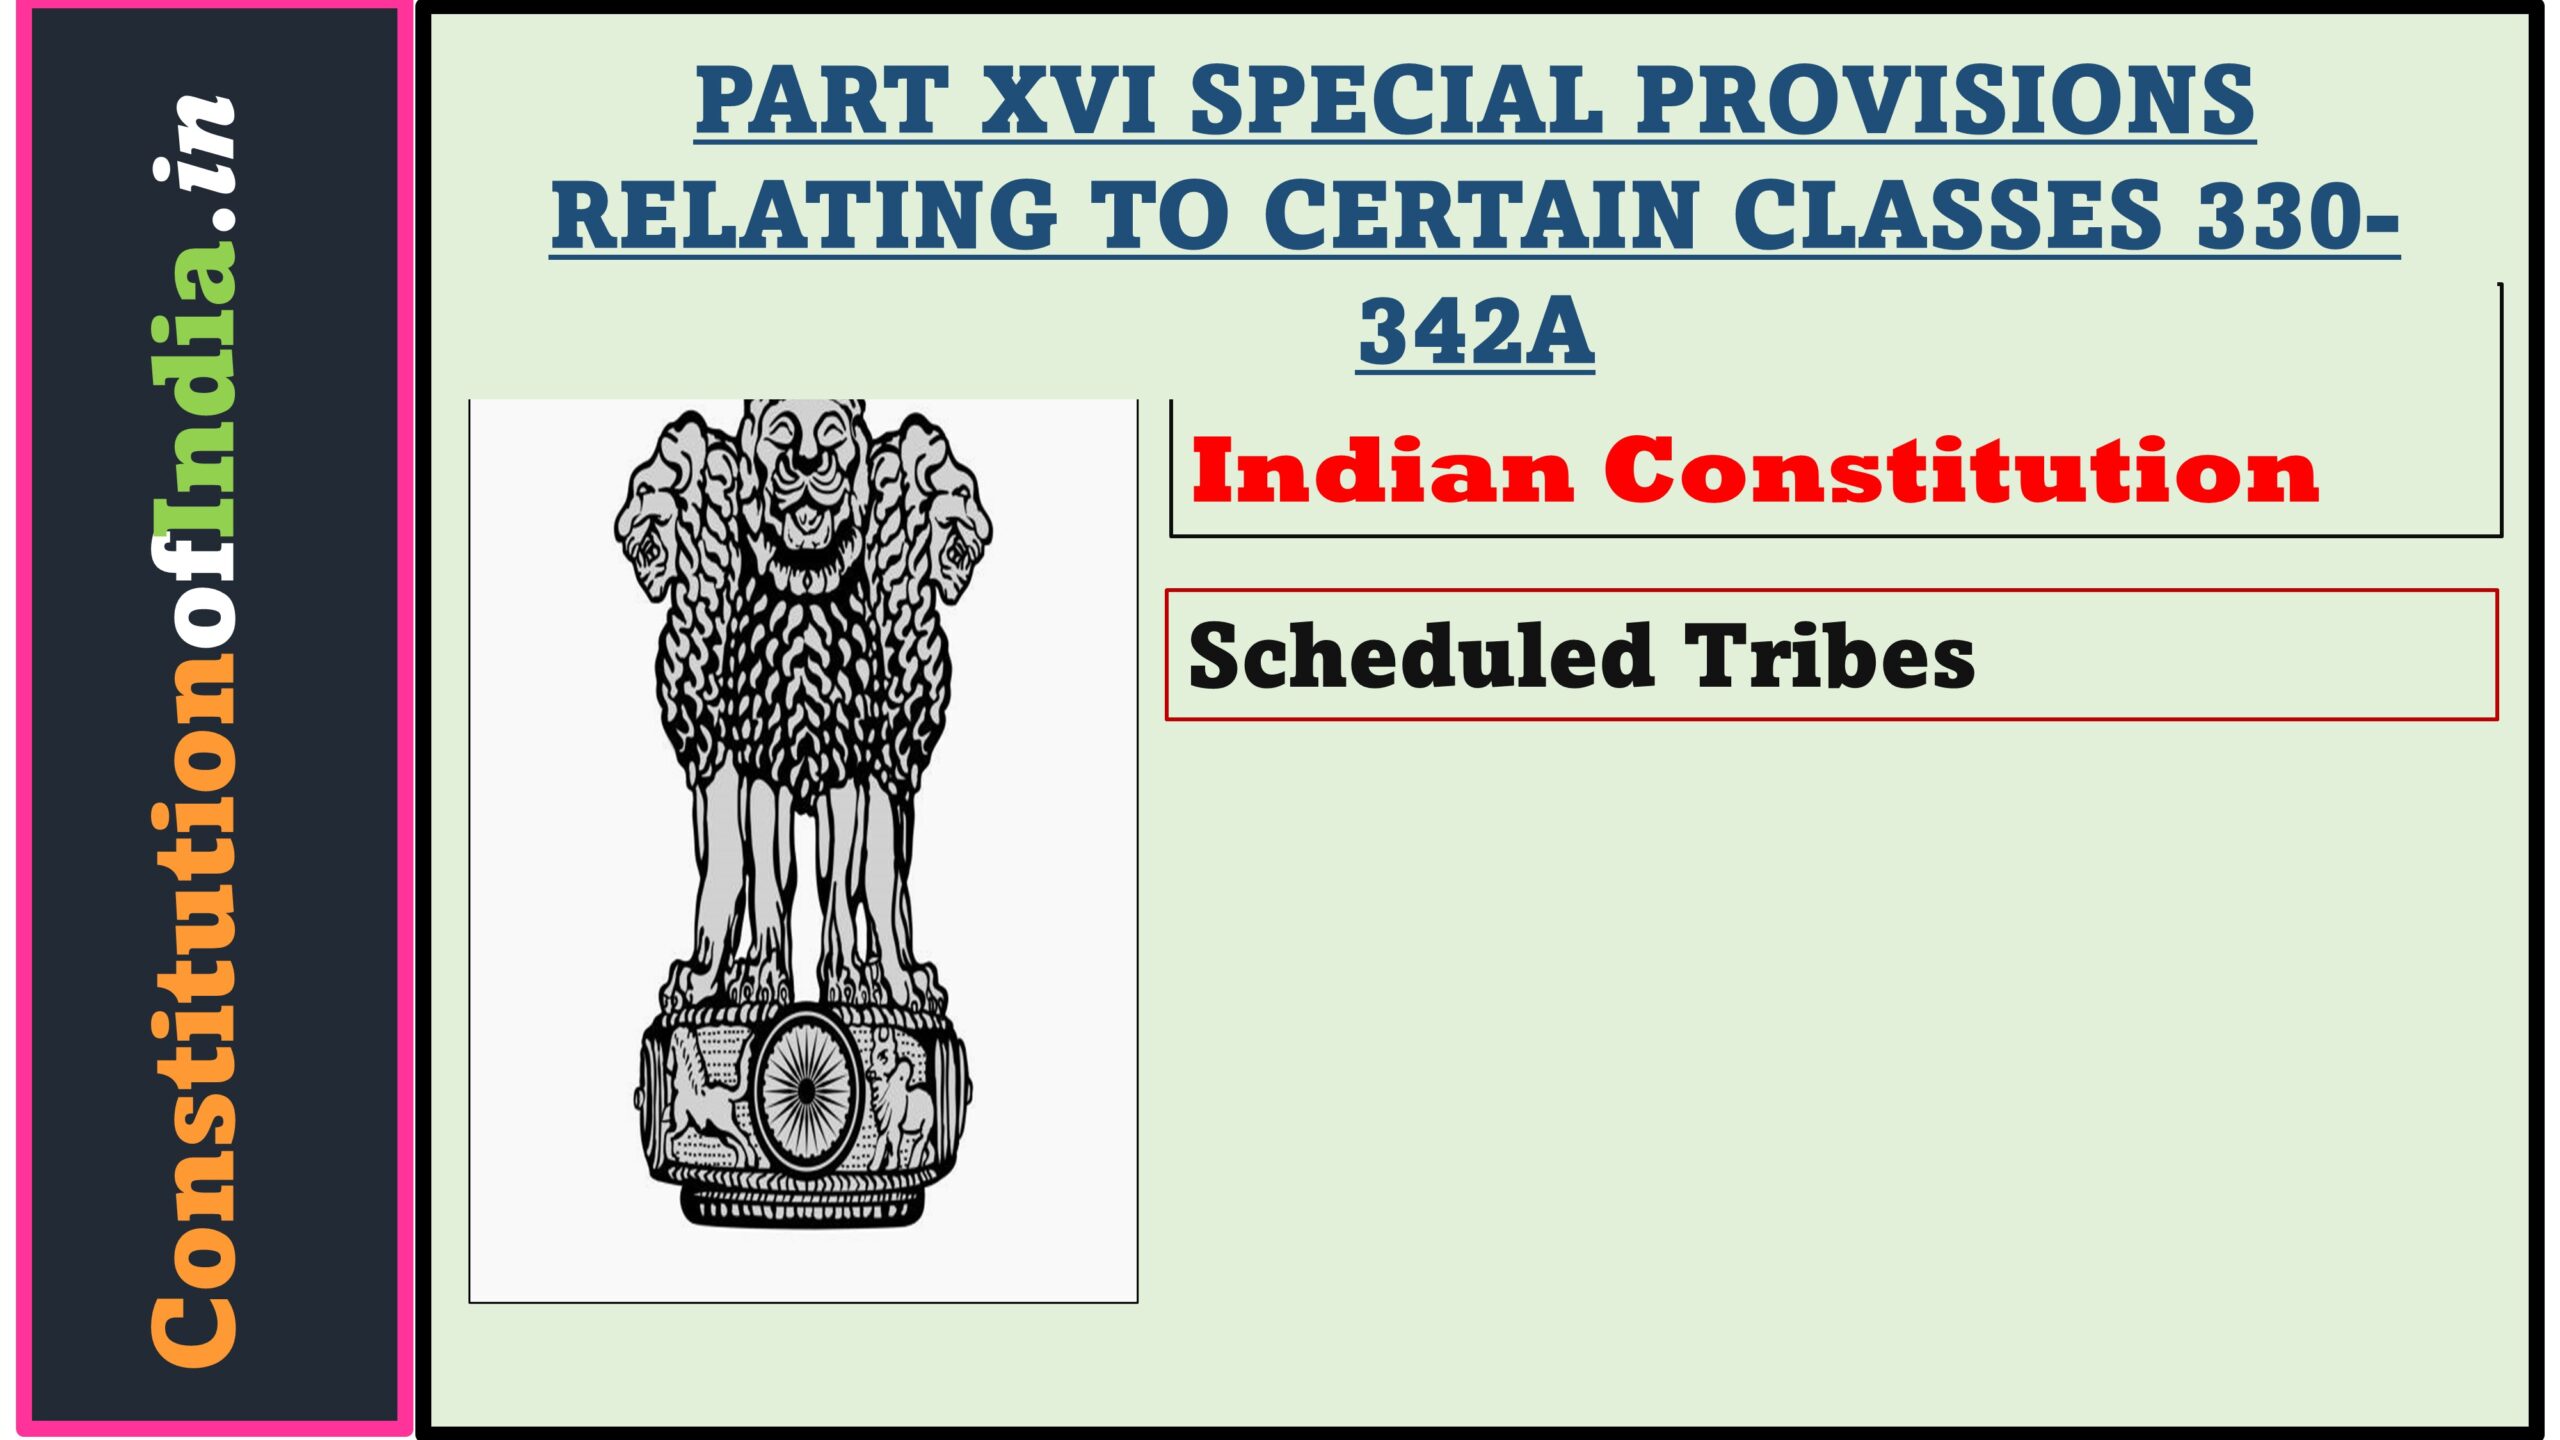 Article 342 of The Indian Constitution